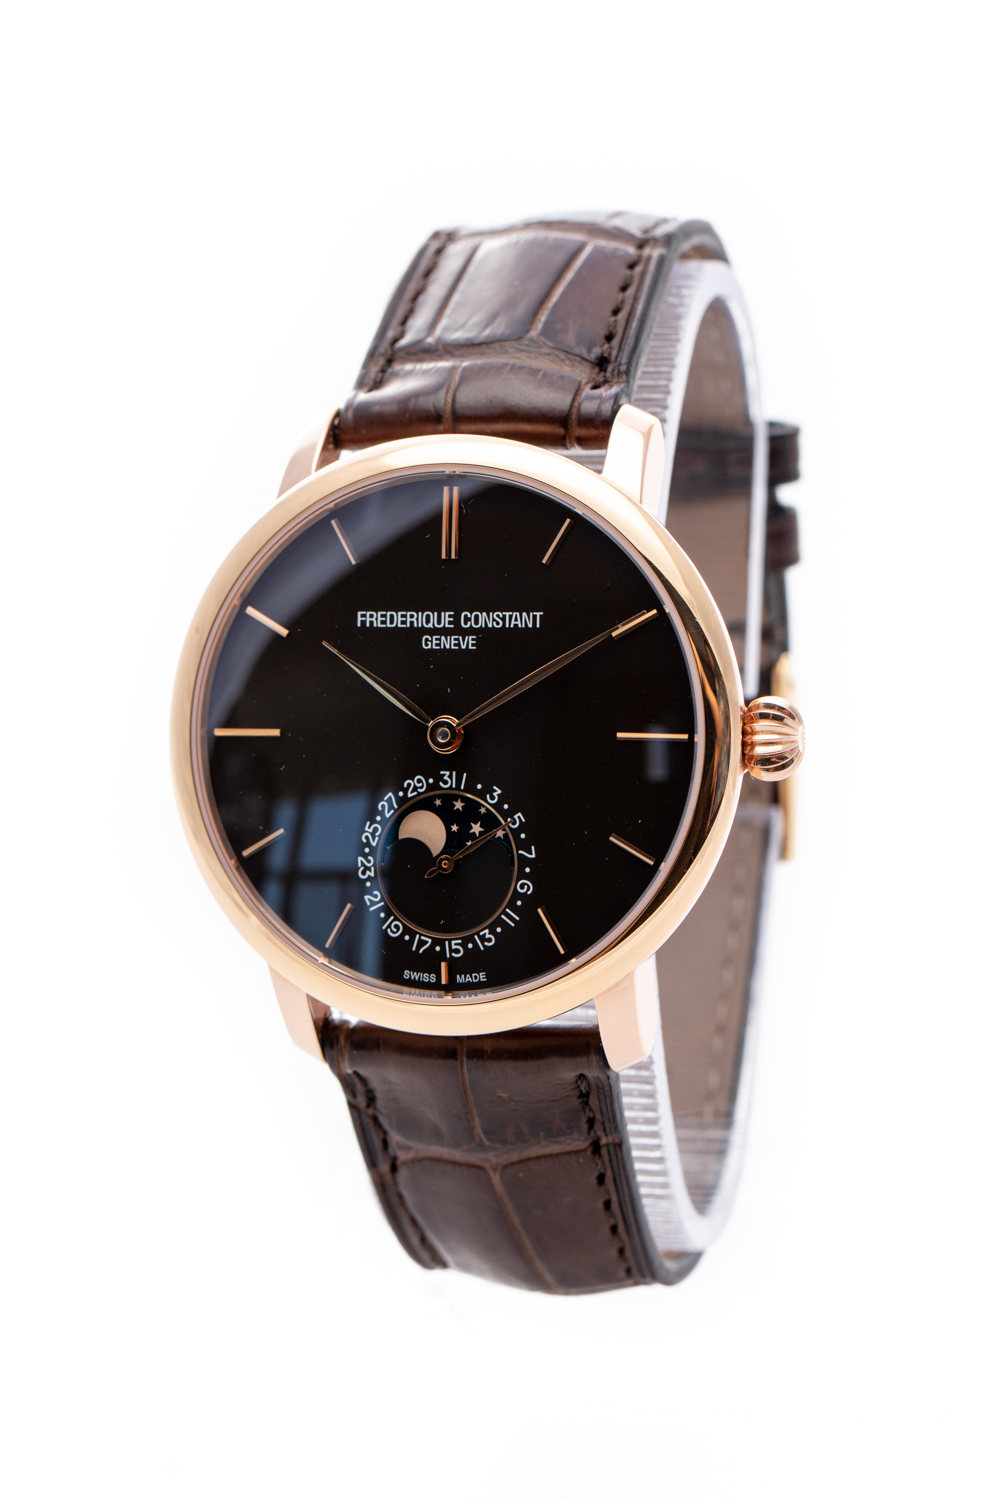 FREDERIQUE CONSTANT SLIMLINE 42MM MOONPHASE ROSE GOLD PLATED REF: FC-705X4S4/5/6